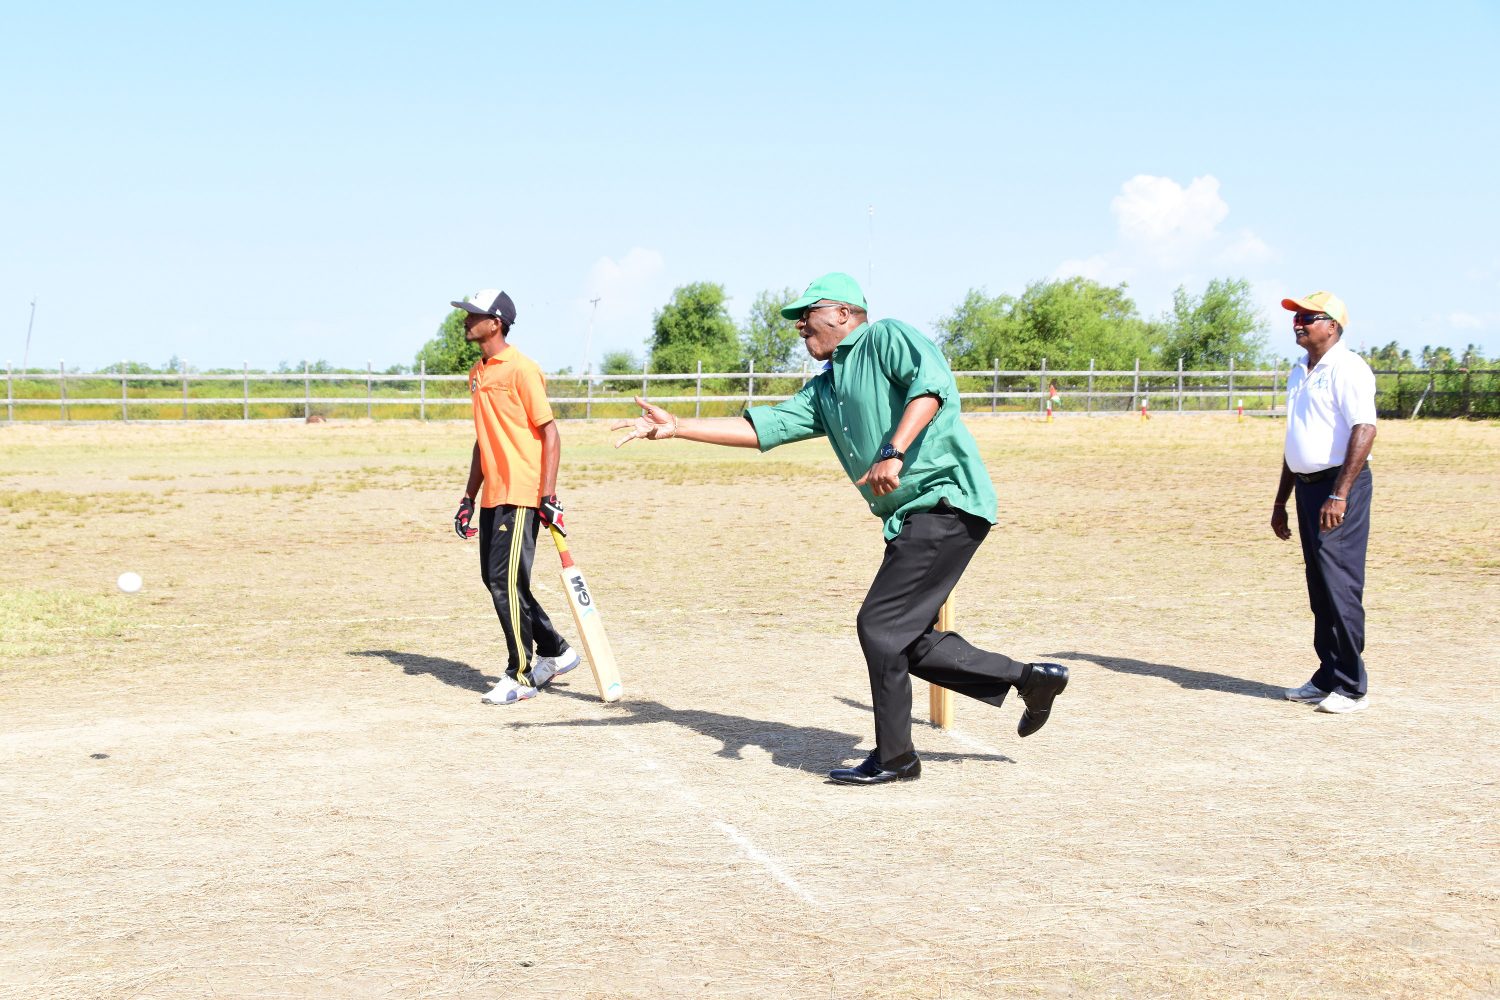 Minister of State, Joseph Harmon took to the field to bowl the first ball to kick start the finals of the cricket tournament. (Ministry of the Presidency photo)